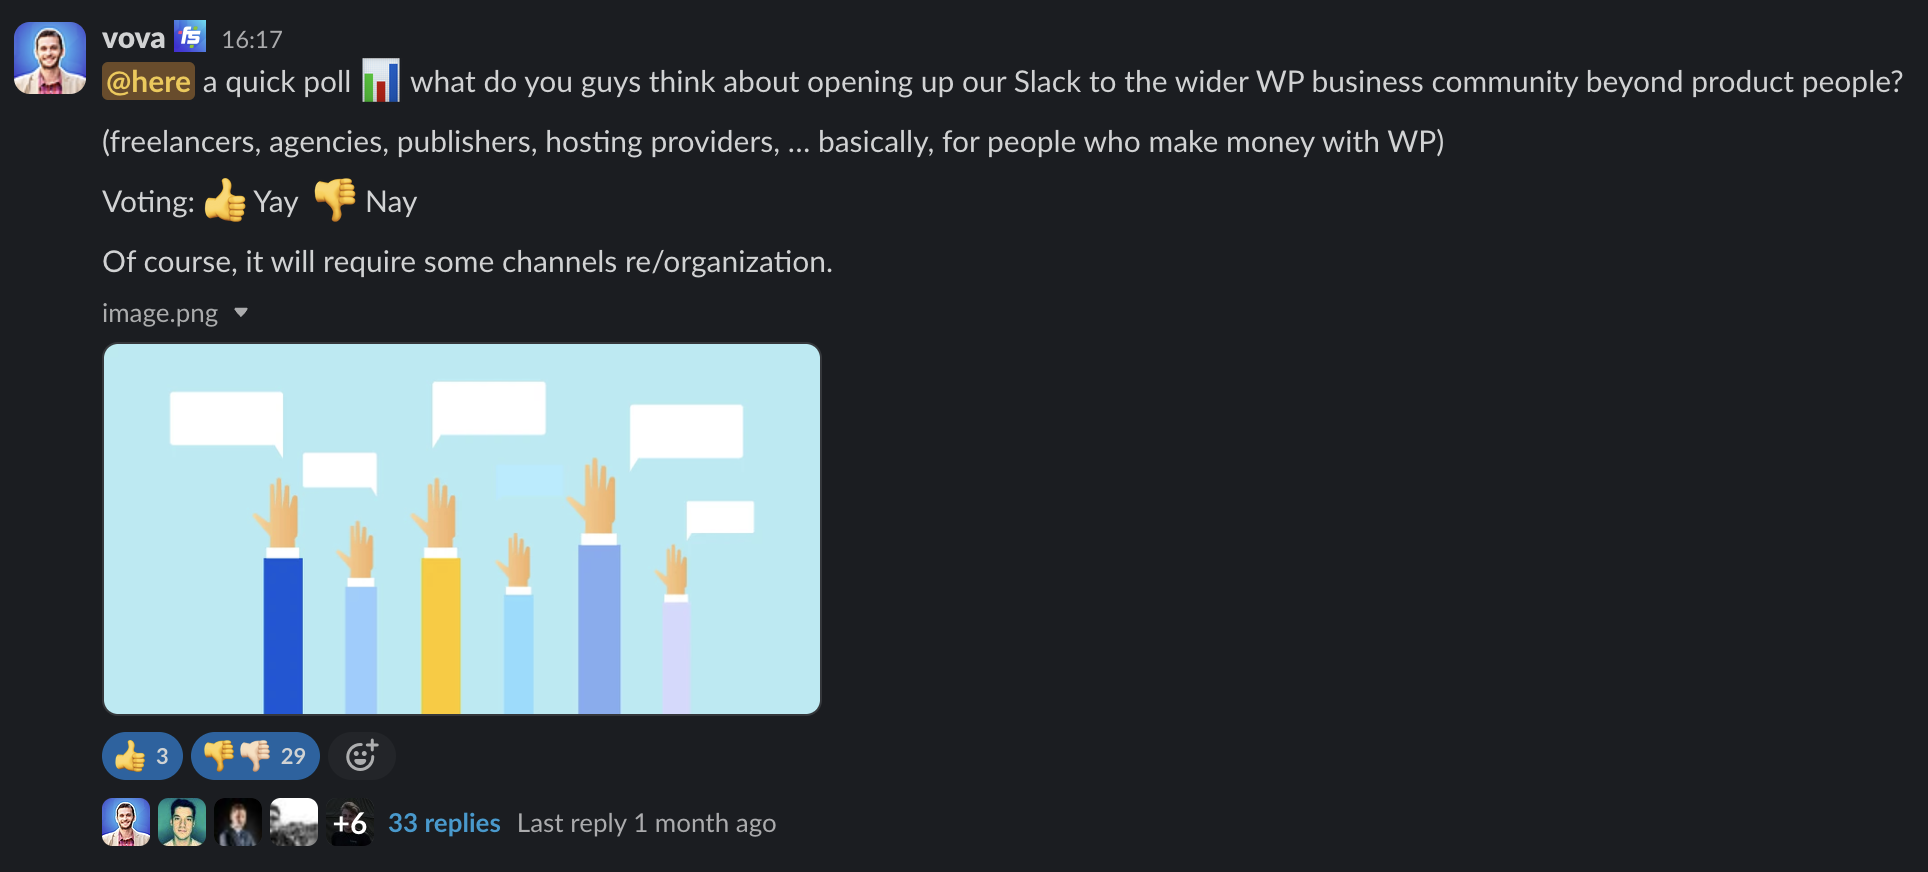 Poll on opening Freemius Slack to the wider WordPress business community